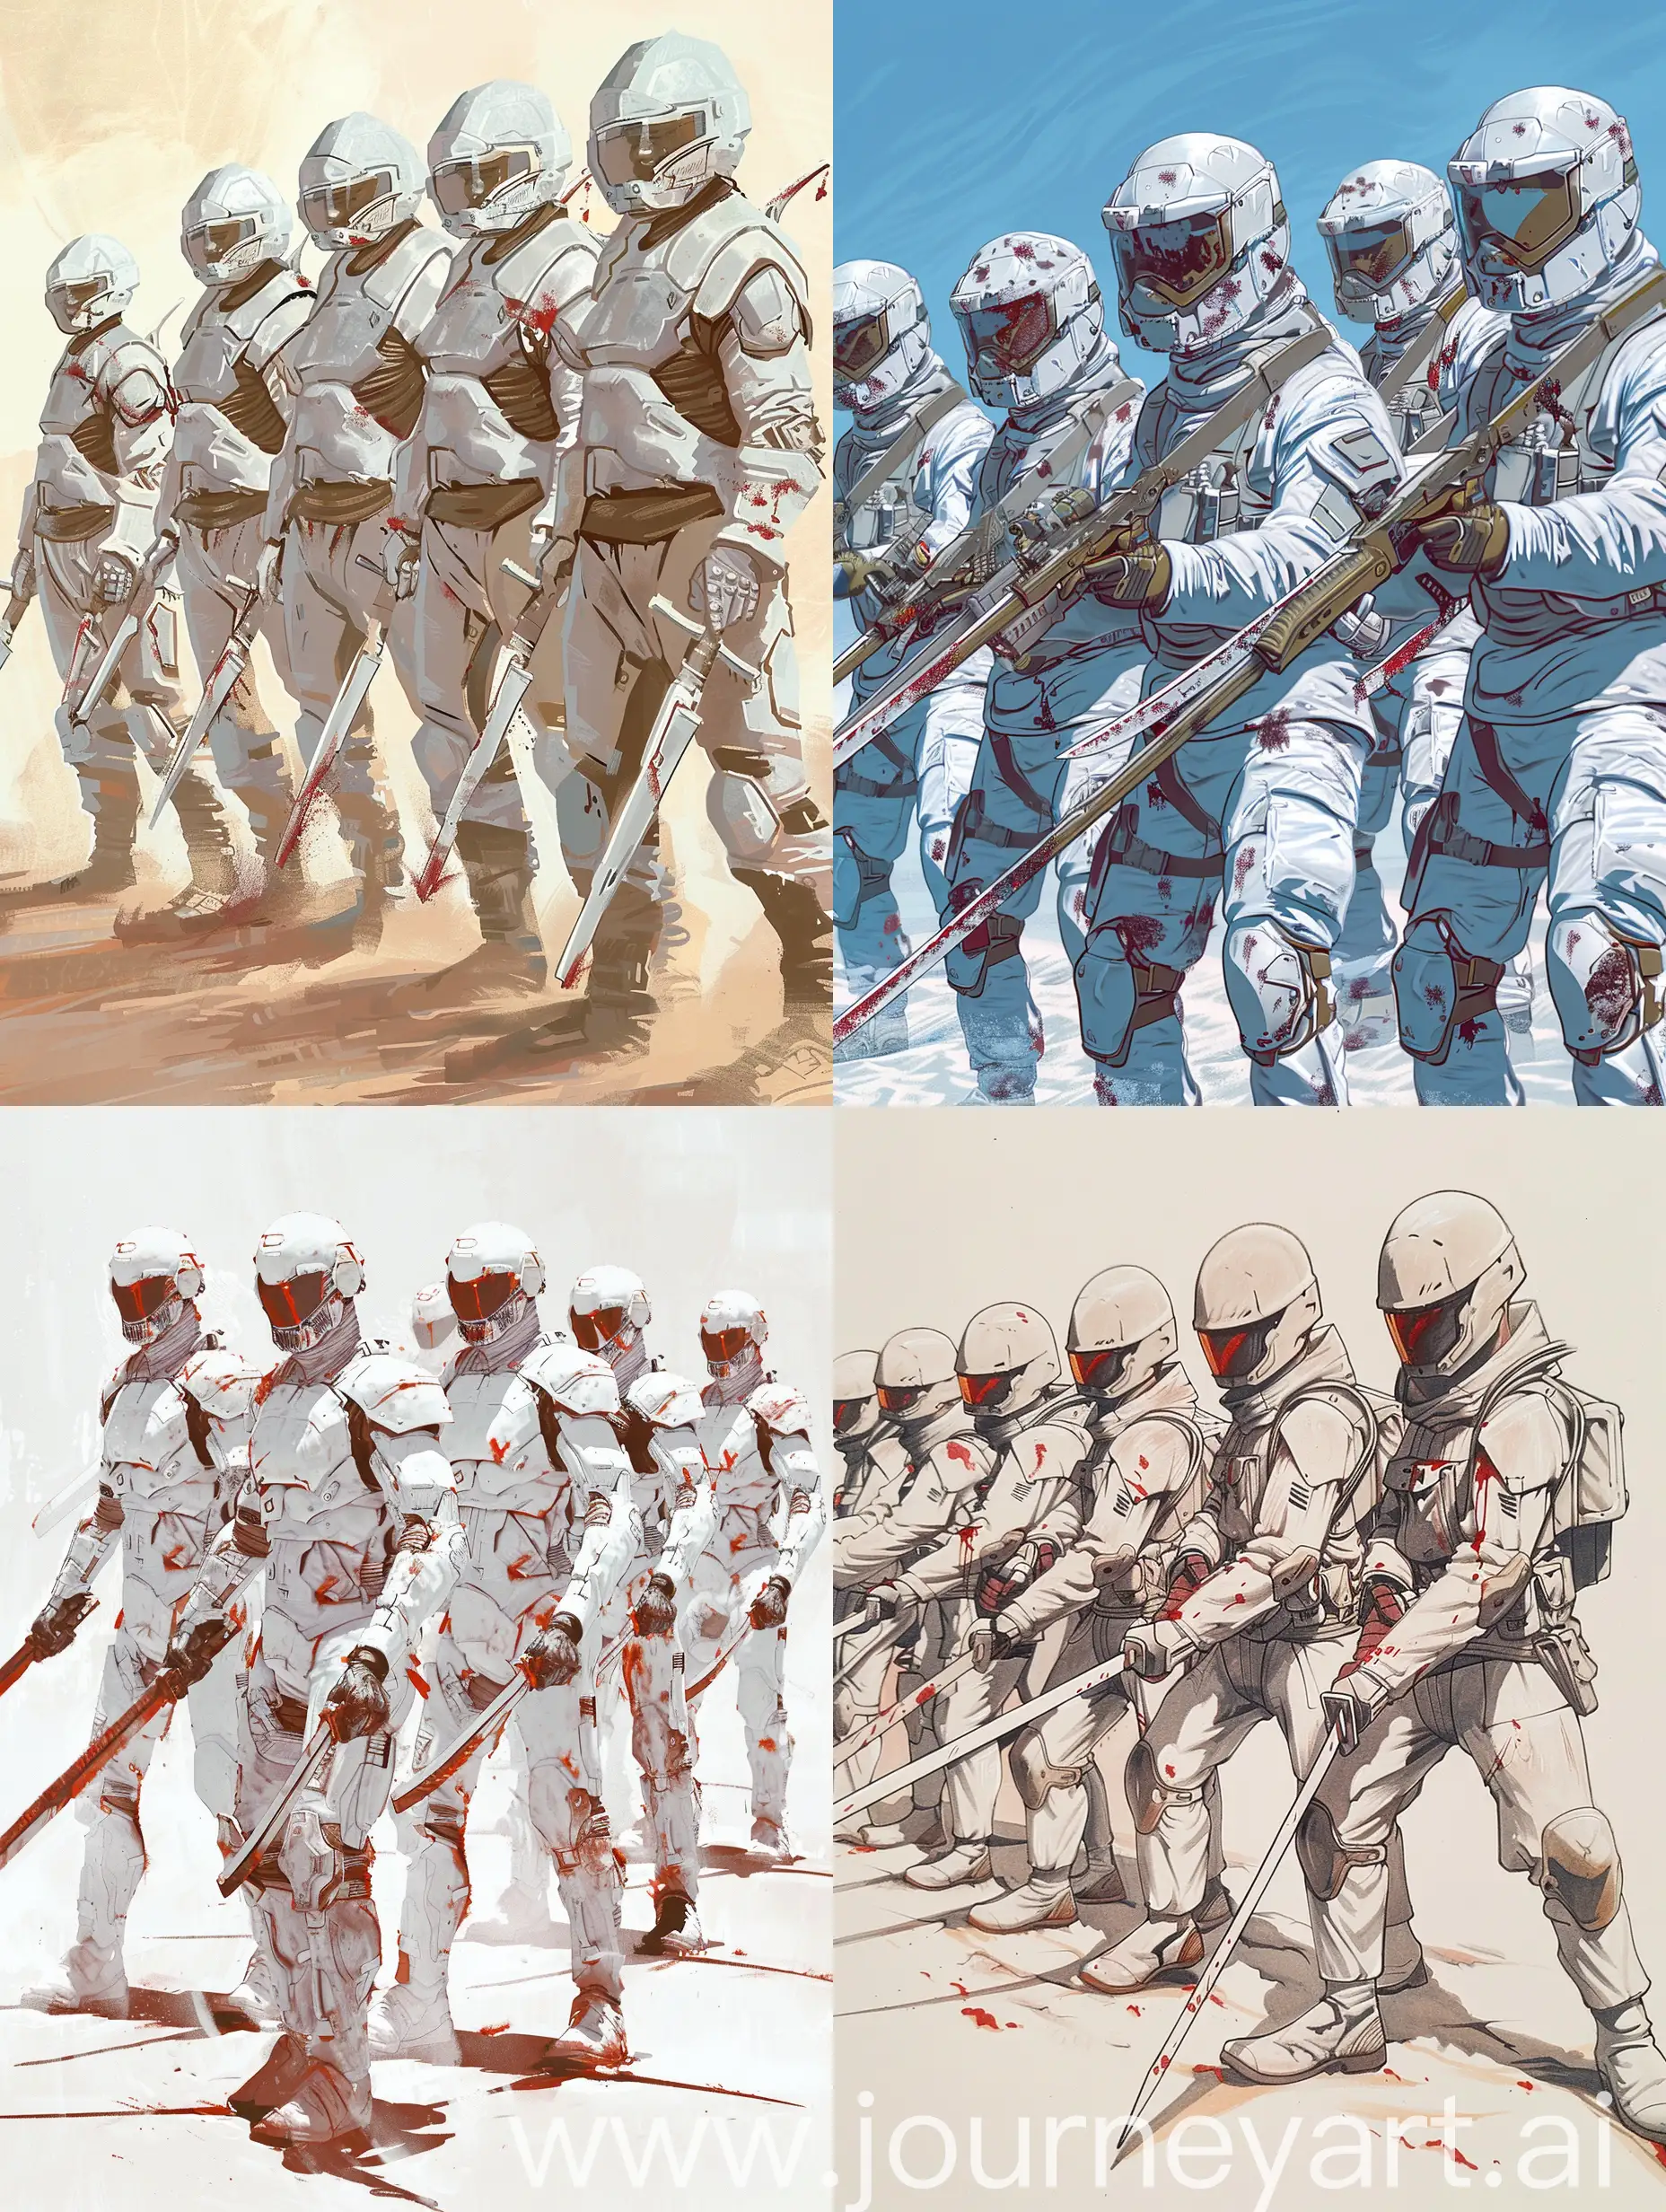 Draw me a squad of Dune sardaukar sci-fi soldiers armed with futuristic katana-like swords. Their white tactical suits are lightly covered with their enemies blood. 